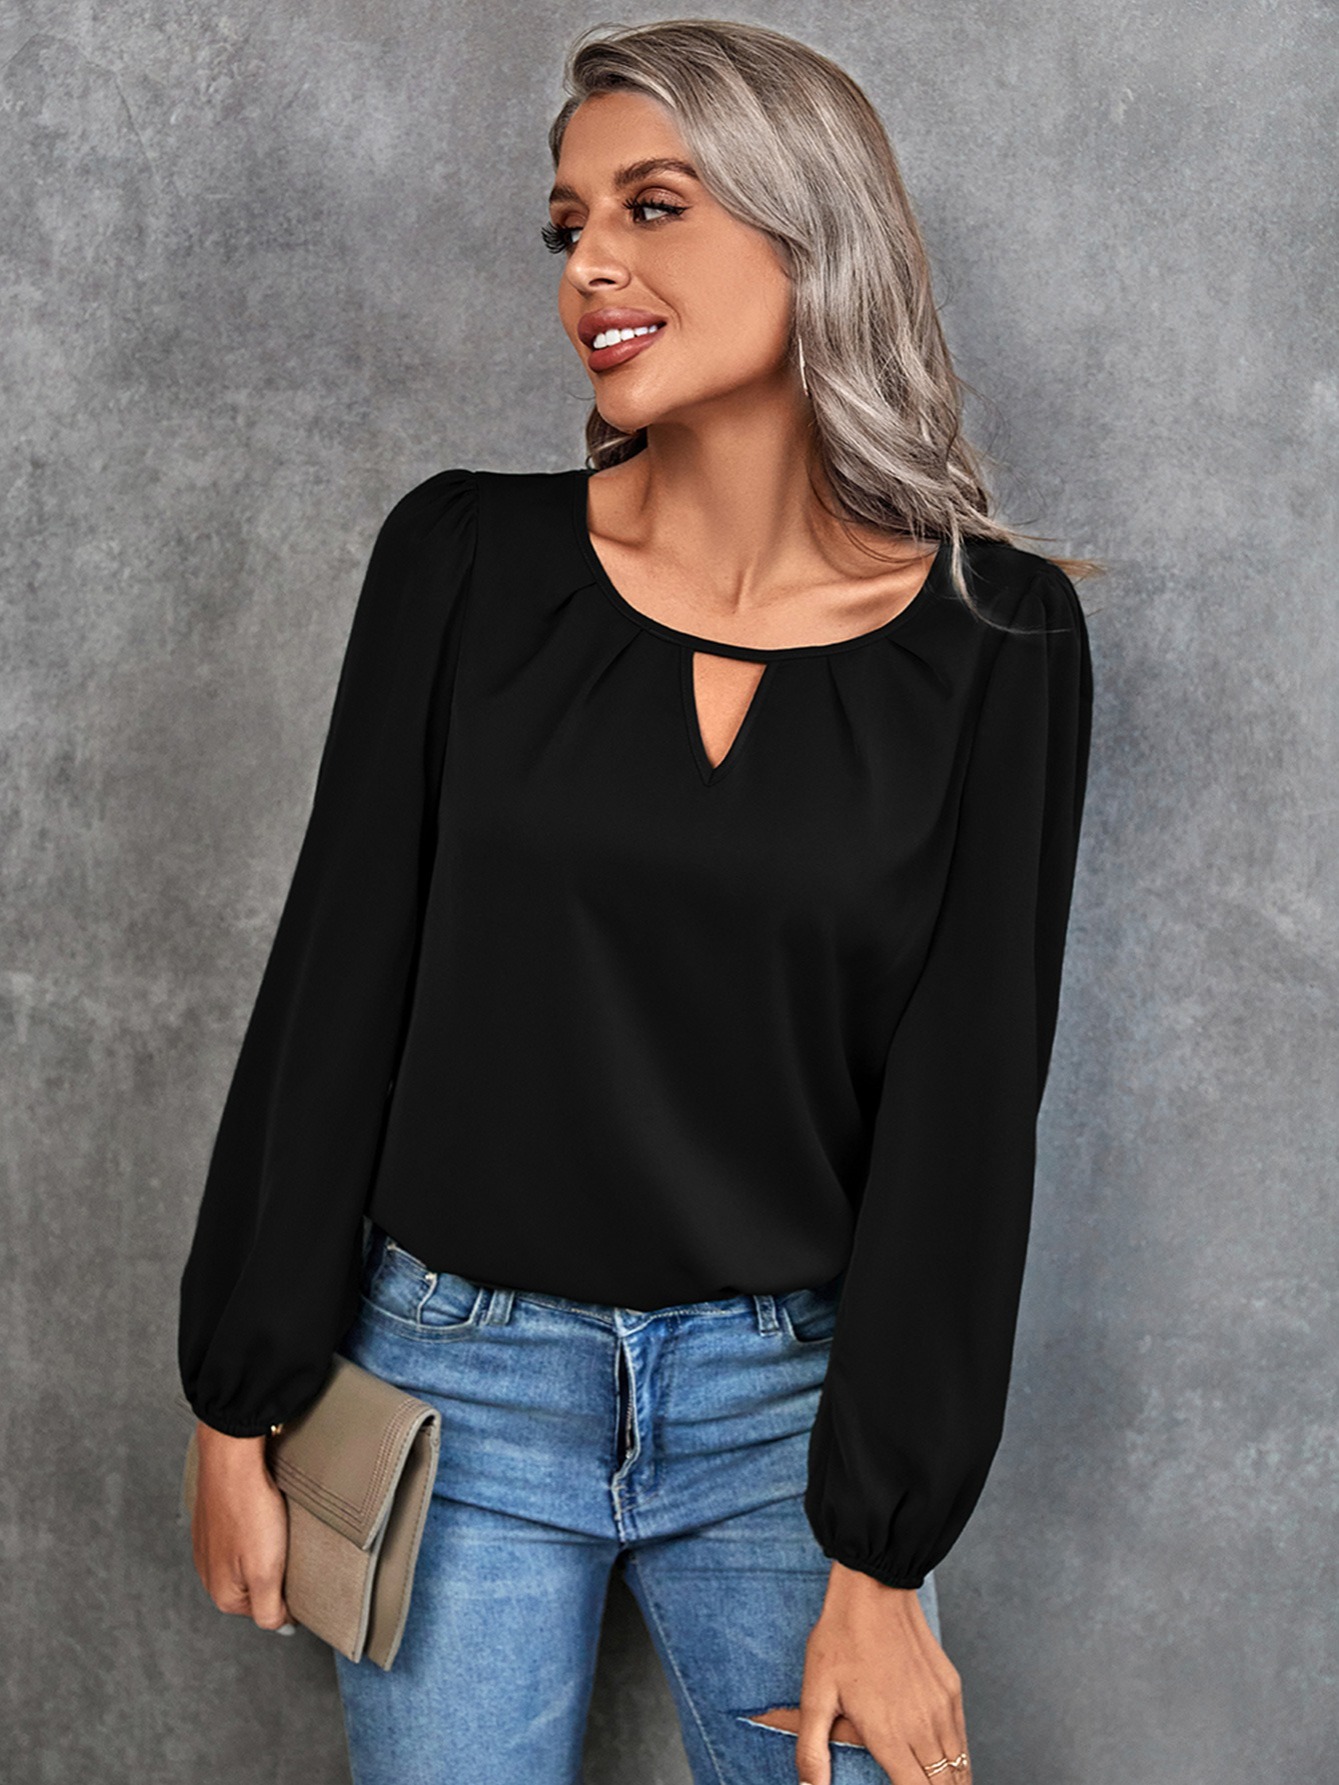 My Comfy Blouse Review